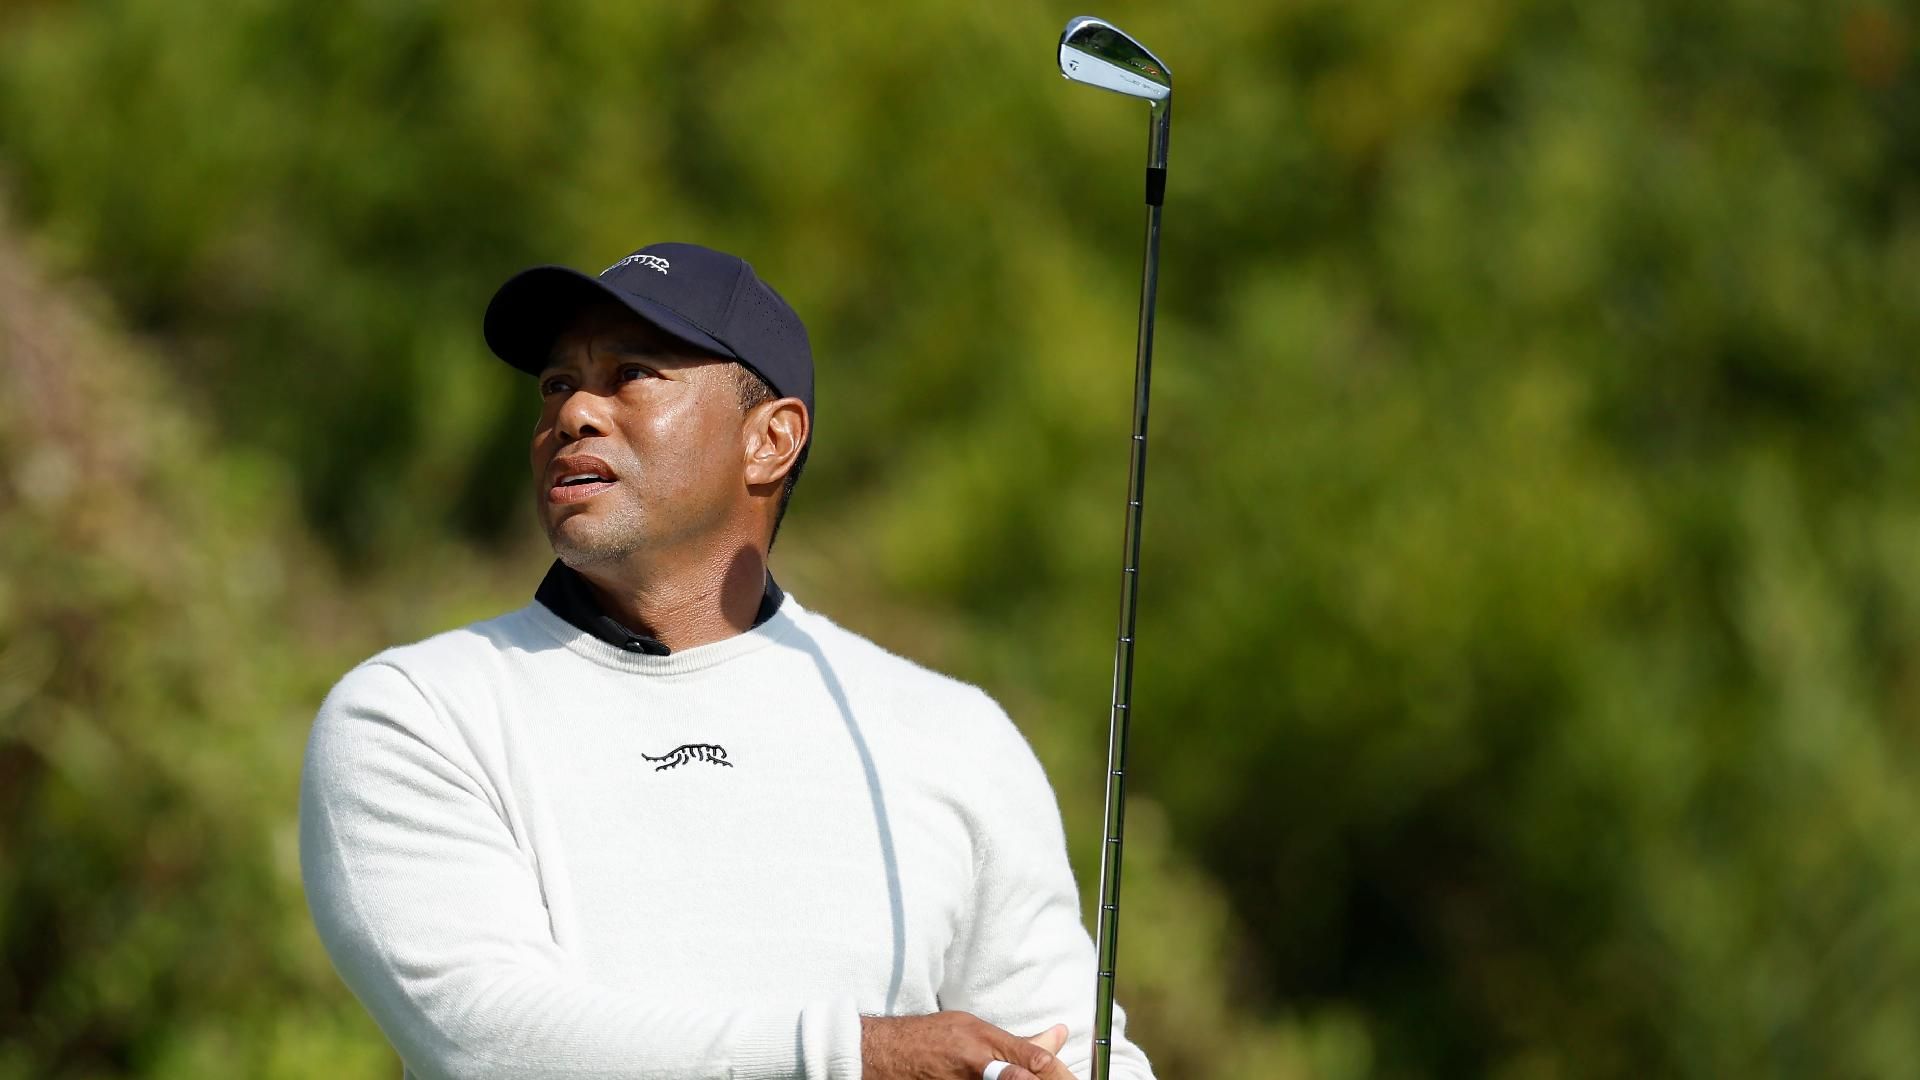 Tiger Woods blames back spasm for shanking last hole in California